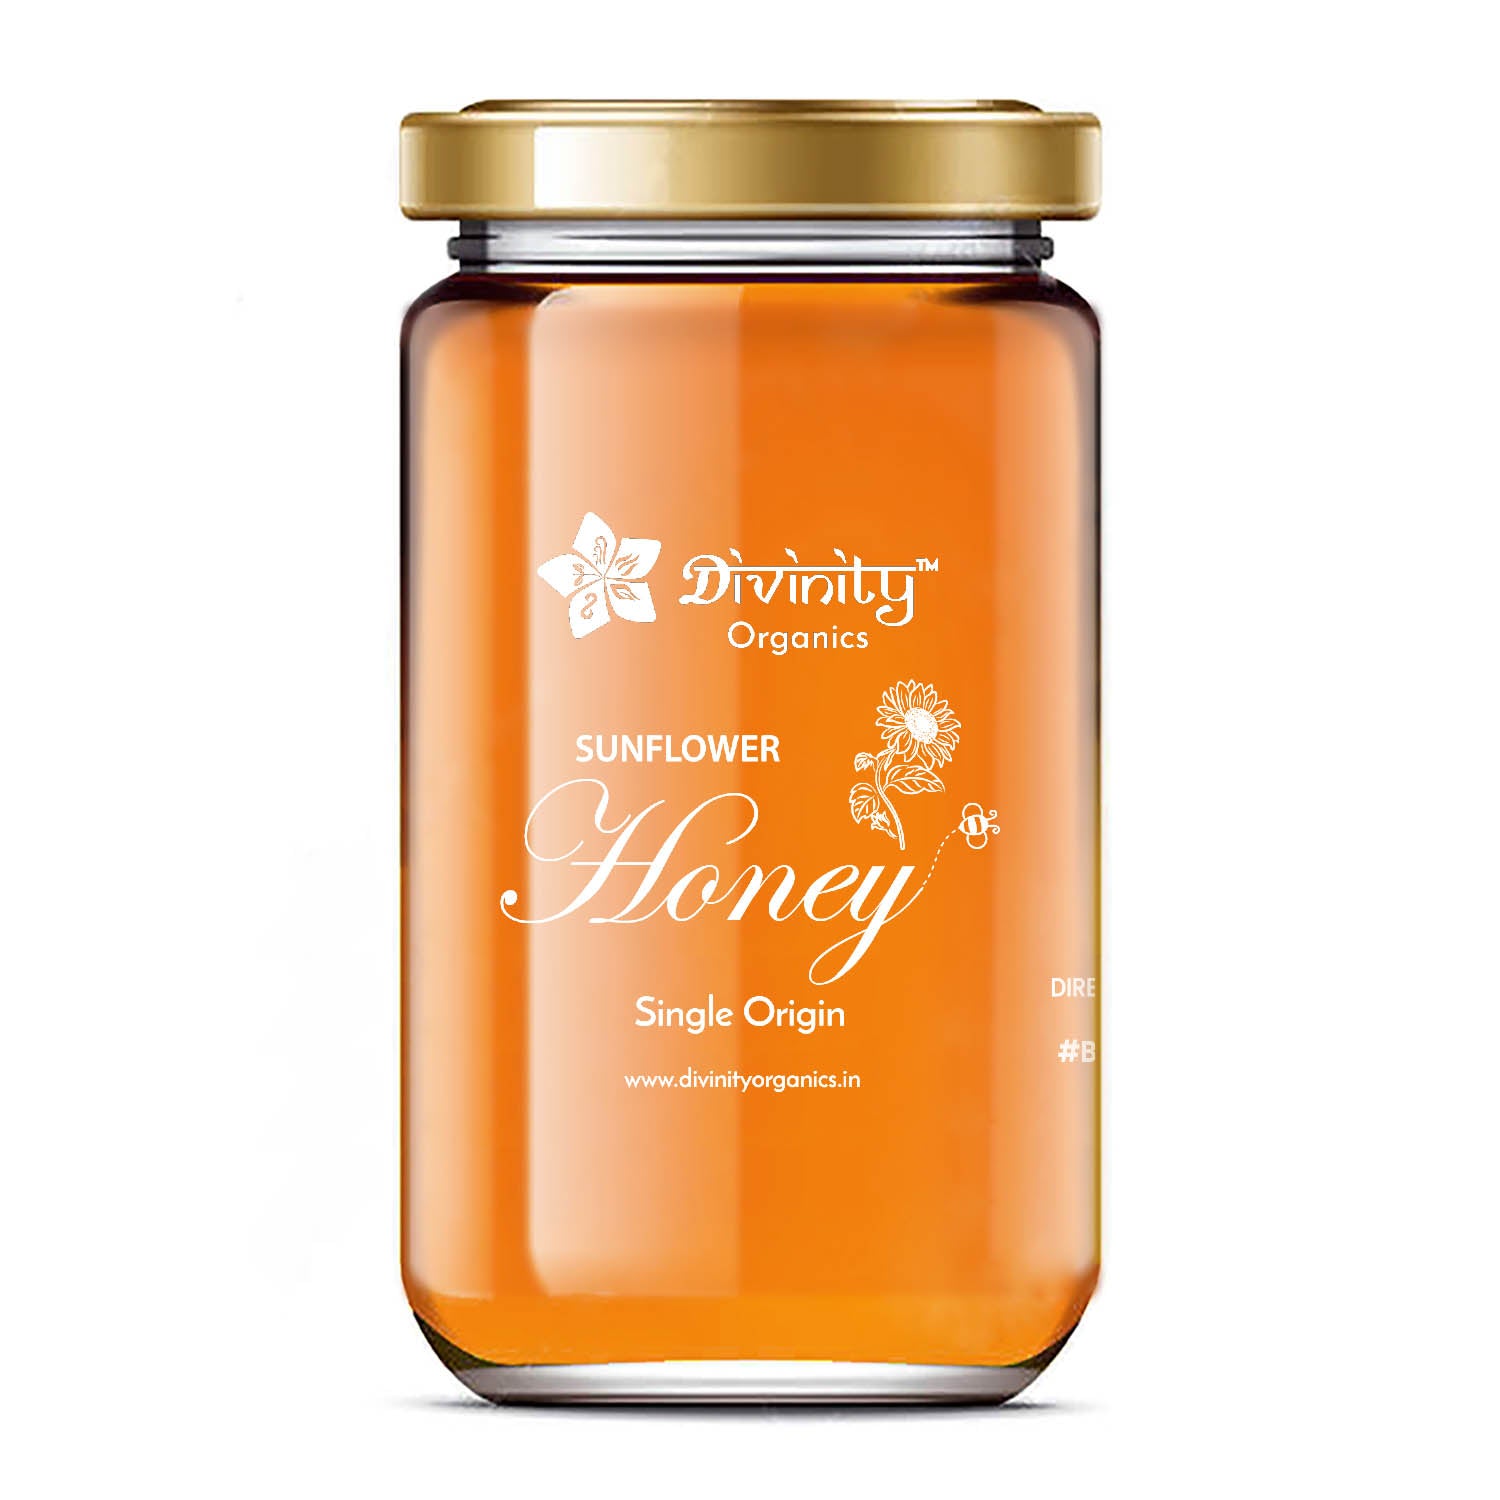 Divinity Organics - Sunflower Honey -Made from the nectar of sunflowers, sunflower honey is high in natural glucose. Much like the colour of this flower is a delight to the eyes, the honey is also delightful, an instant hit of energy. Harvested from the gorgeous sunflower fields in Nagpur, Maharashtra, this mild flavoured honey is the perfect sweetner